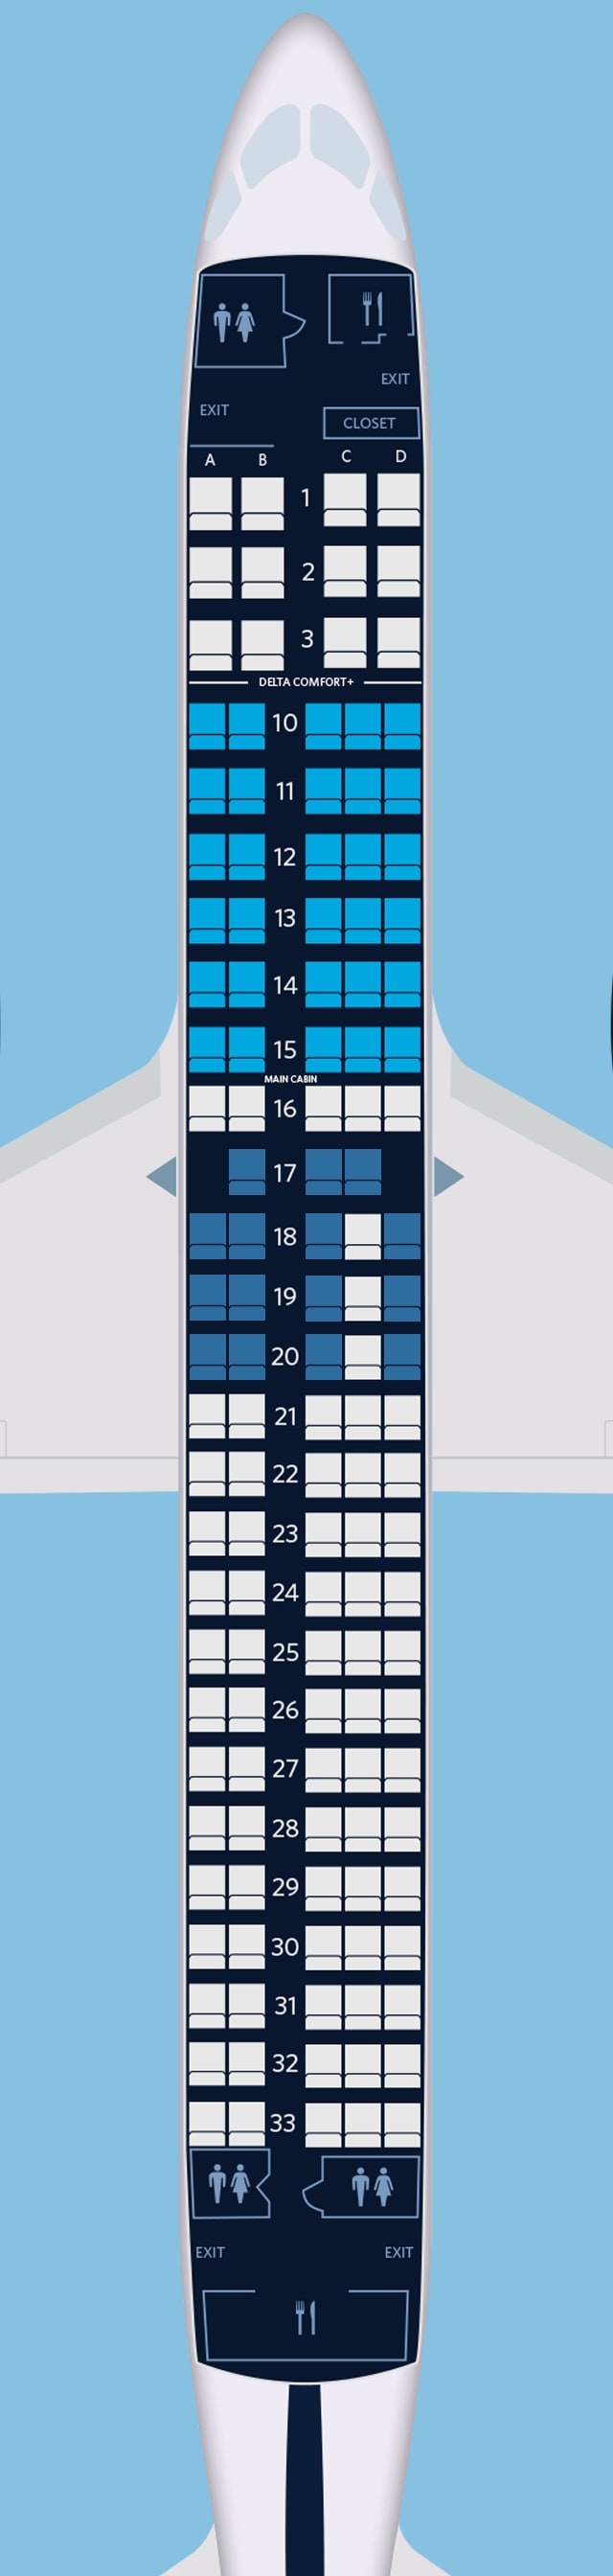 Airbus A220 Jet Seating Chart - Image to u